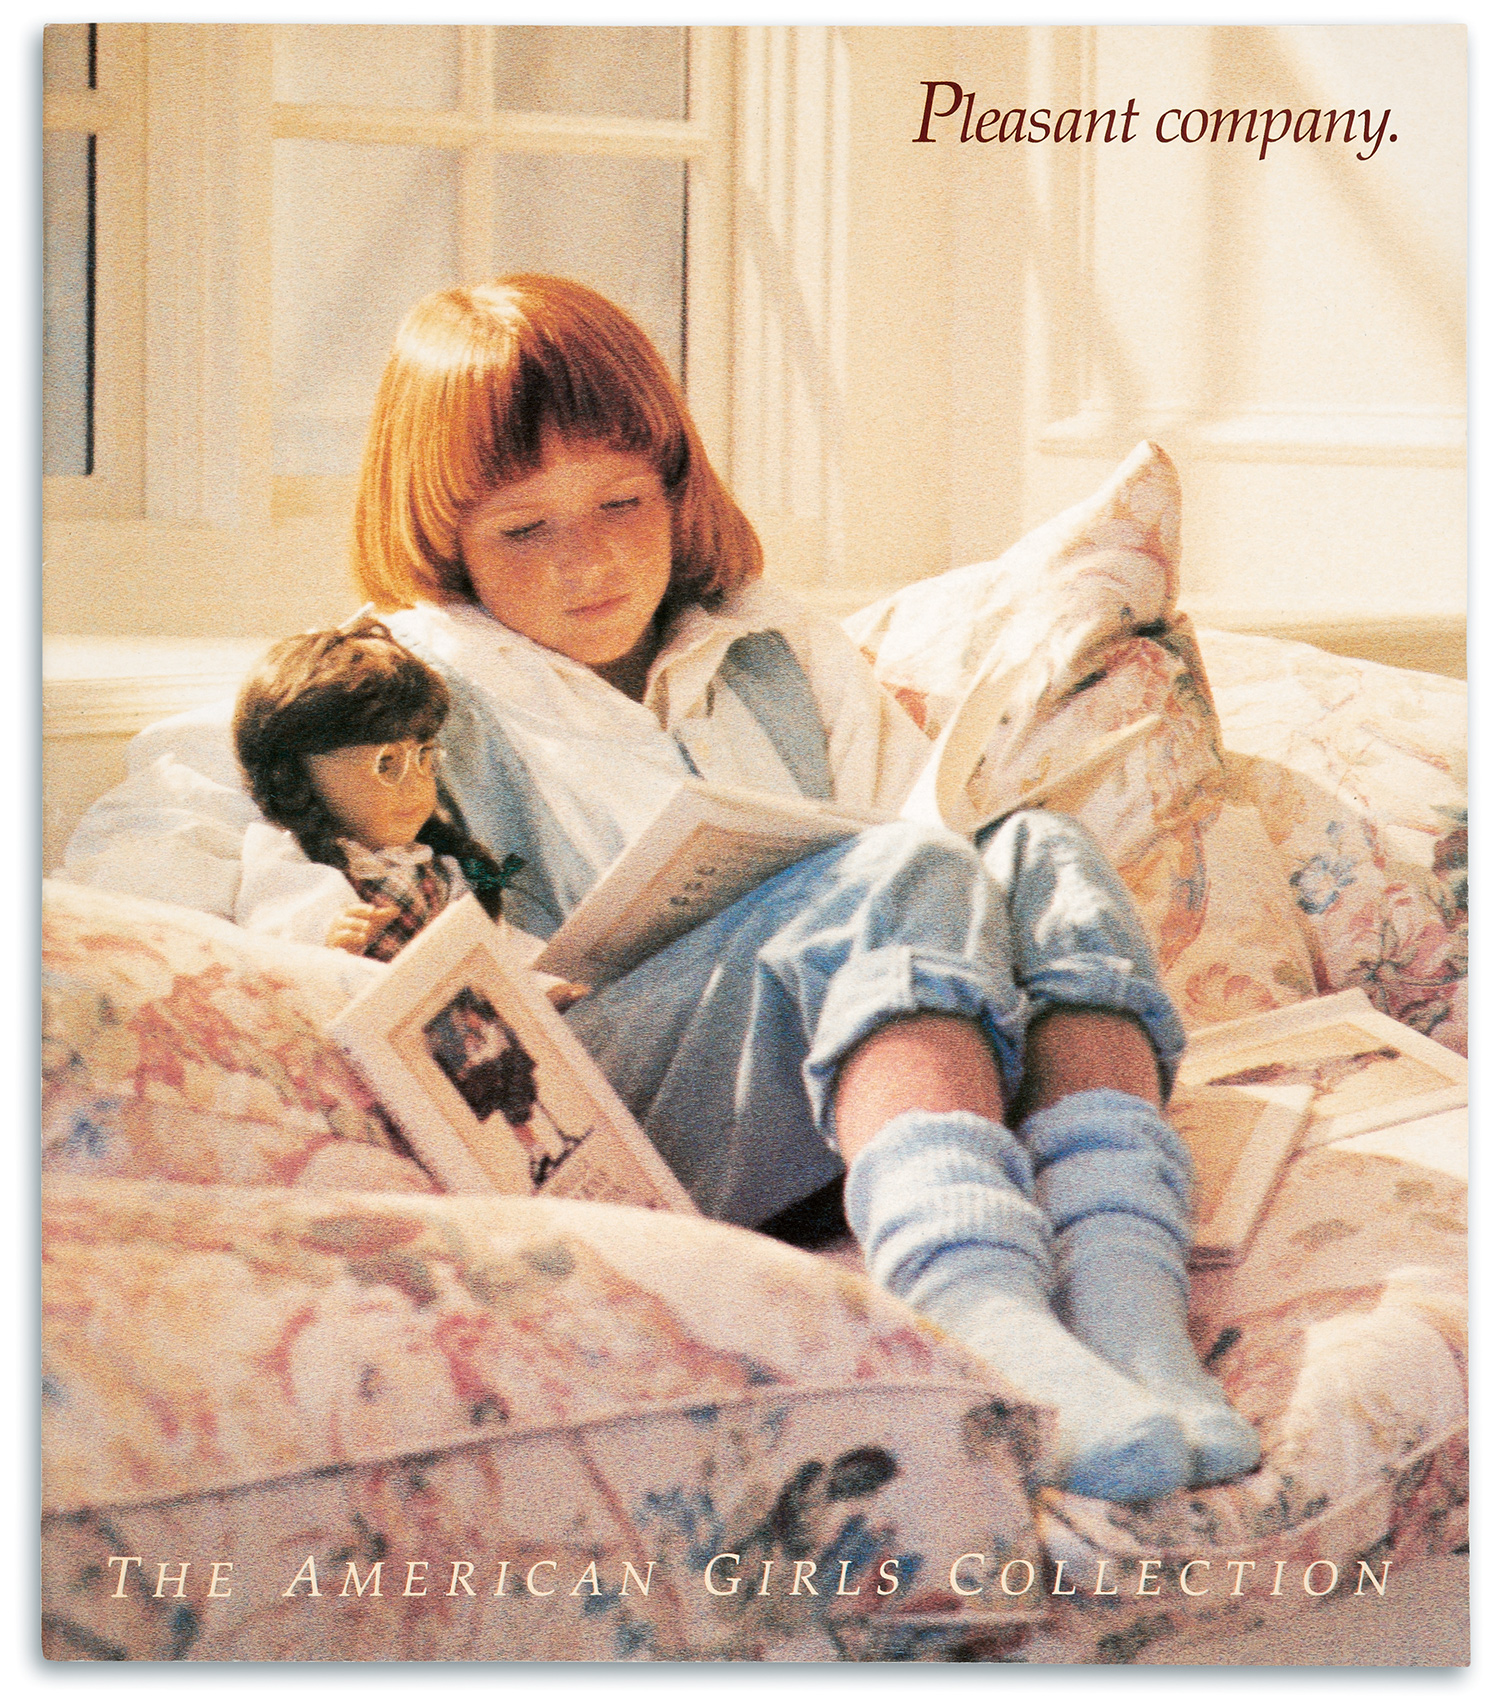 The cover of the first catalog of the Pleasant Company produced in 1986.Bathed in sunshine, a young girl with a bowl-cut wearing a jeans jumper and socks, cozily curls up on a pillowy, pastel-floral window seat and reads to her doll from a book in her lap. Several additional books whose covers match the doll by her side are strewn about.